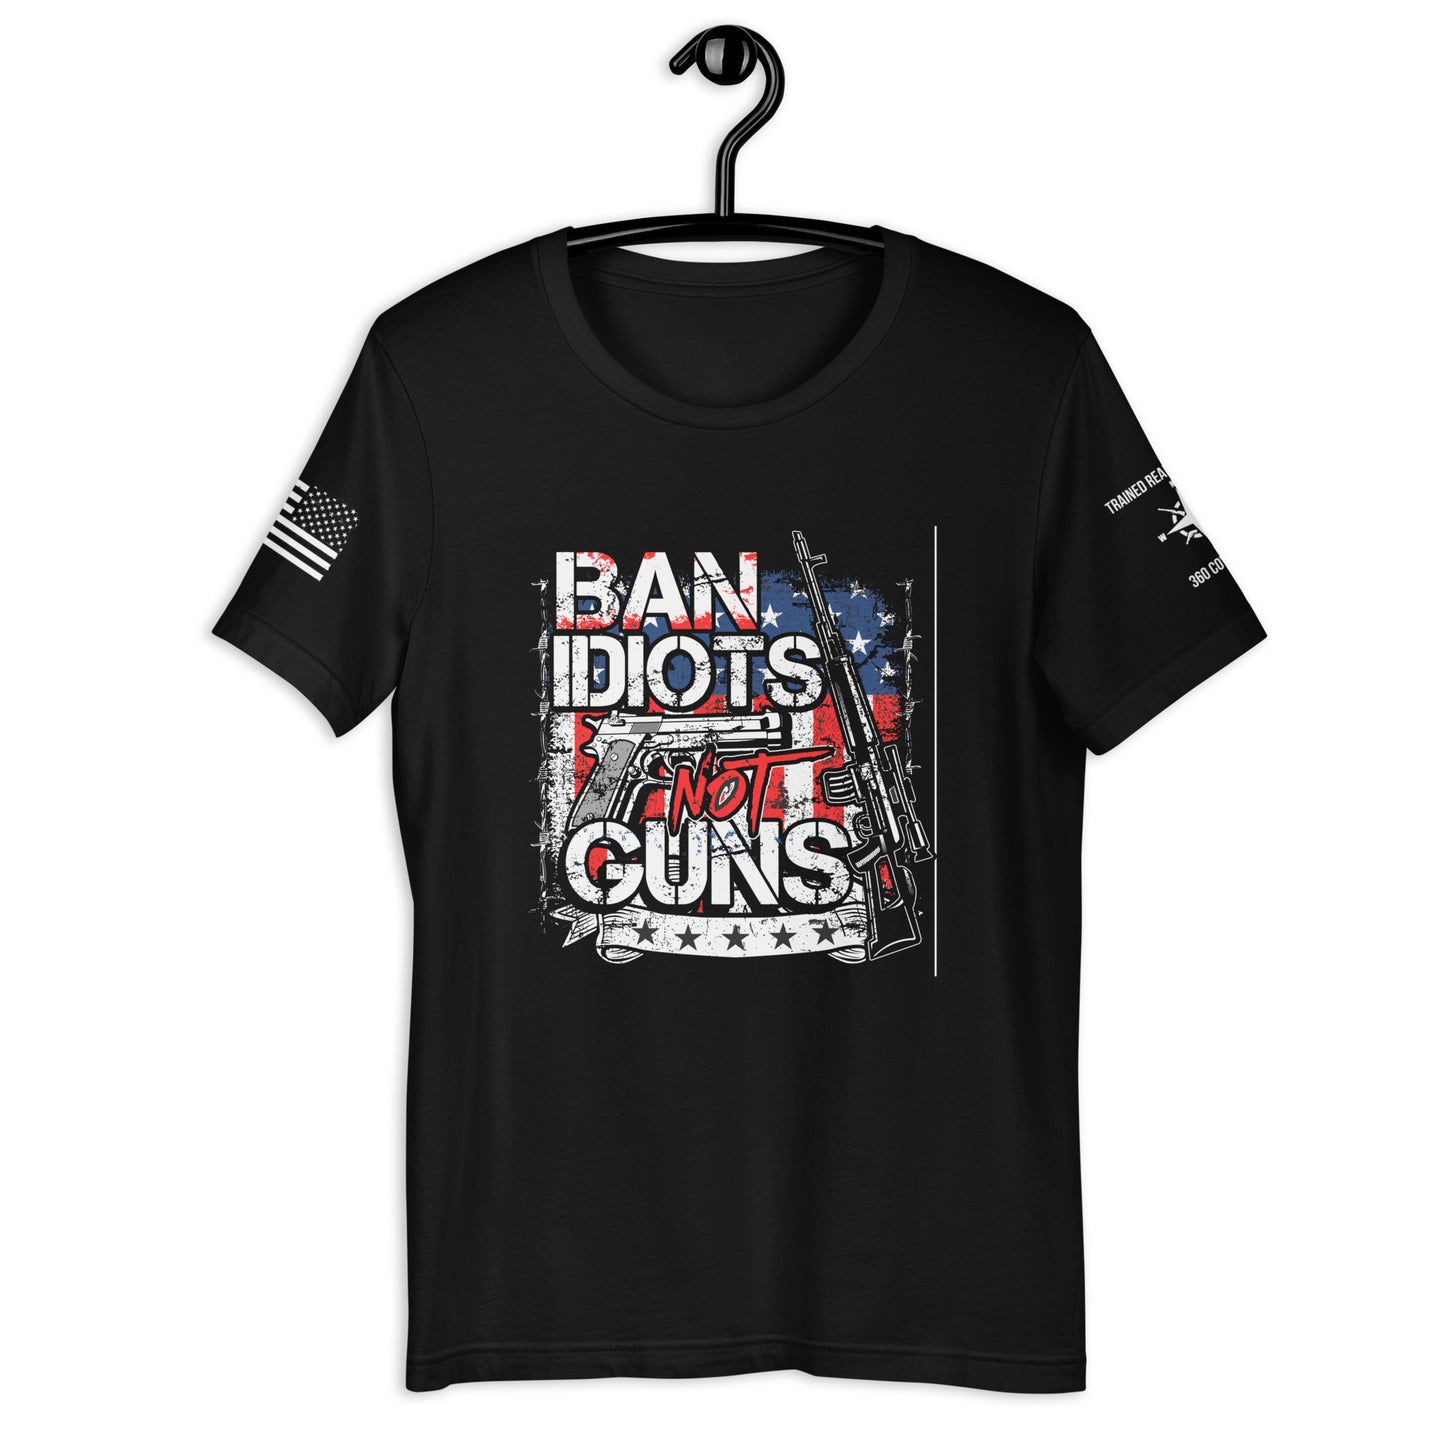 TRA Band Idiots - 2 Men's t-shirt - Trained Ready Armed Apparel